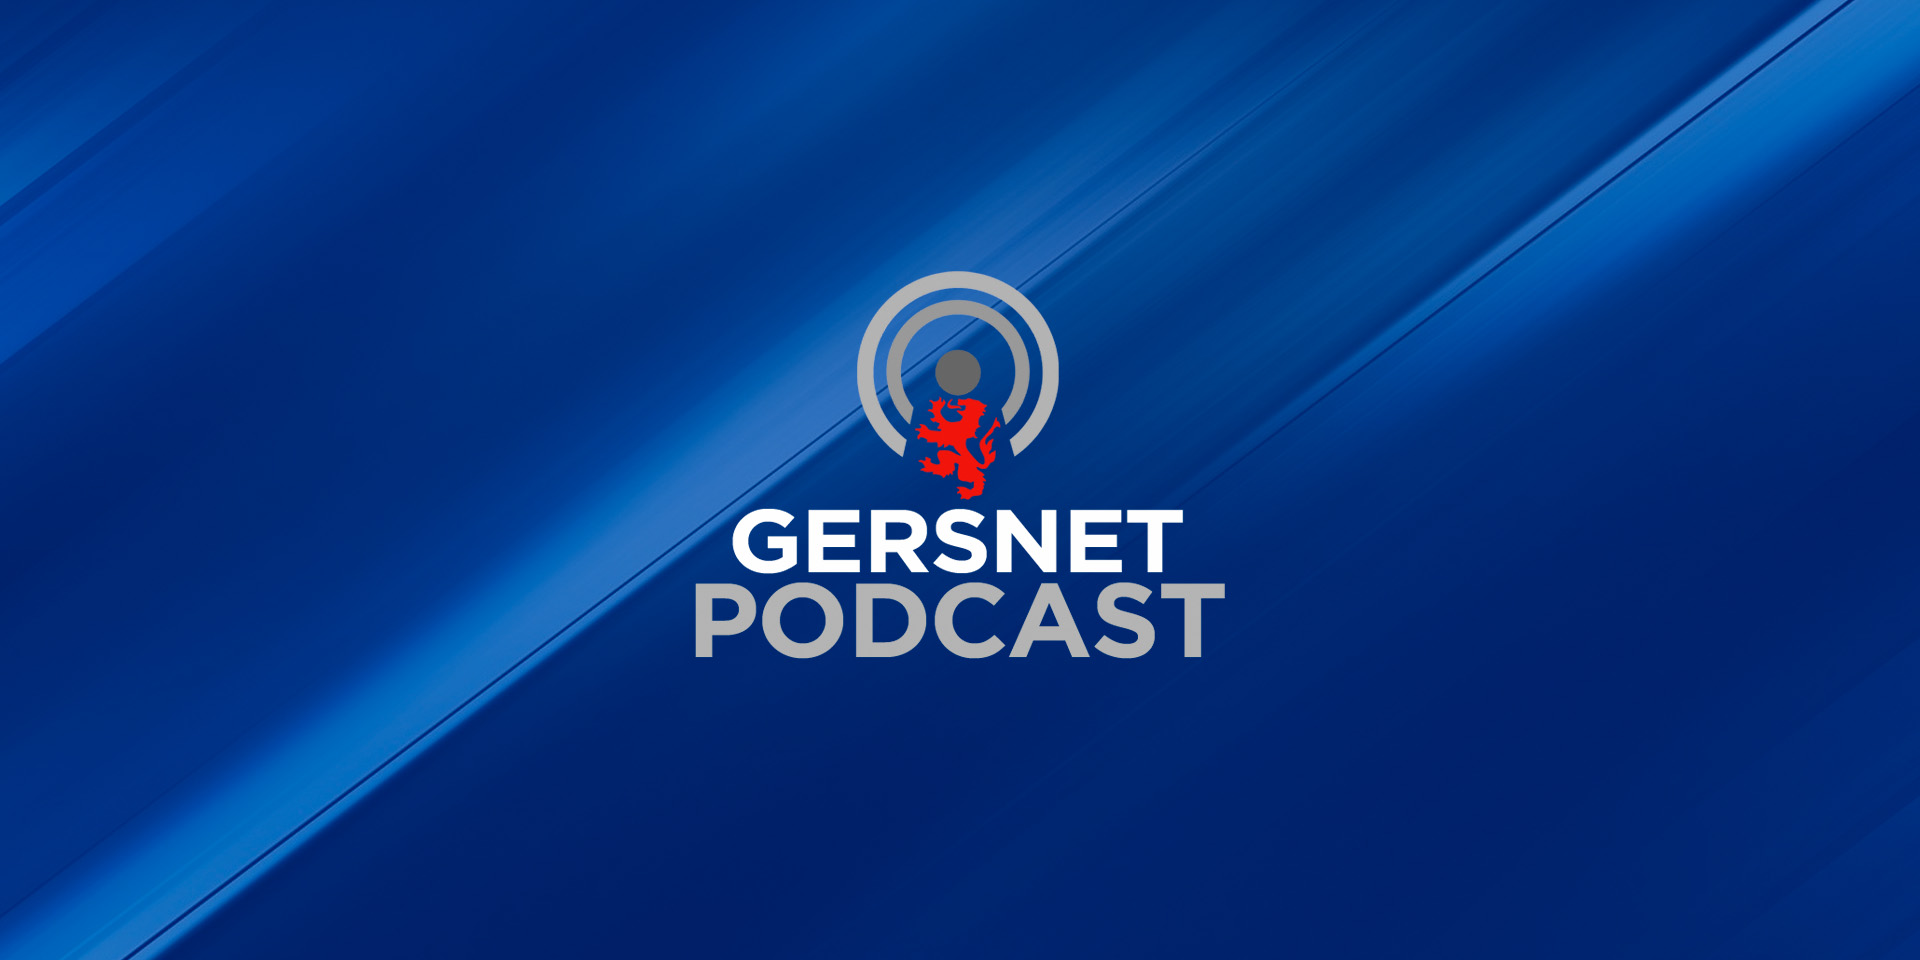 Gersnet Podcast 319 - Jambos to the rescue